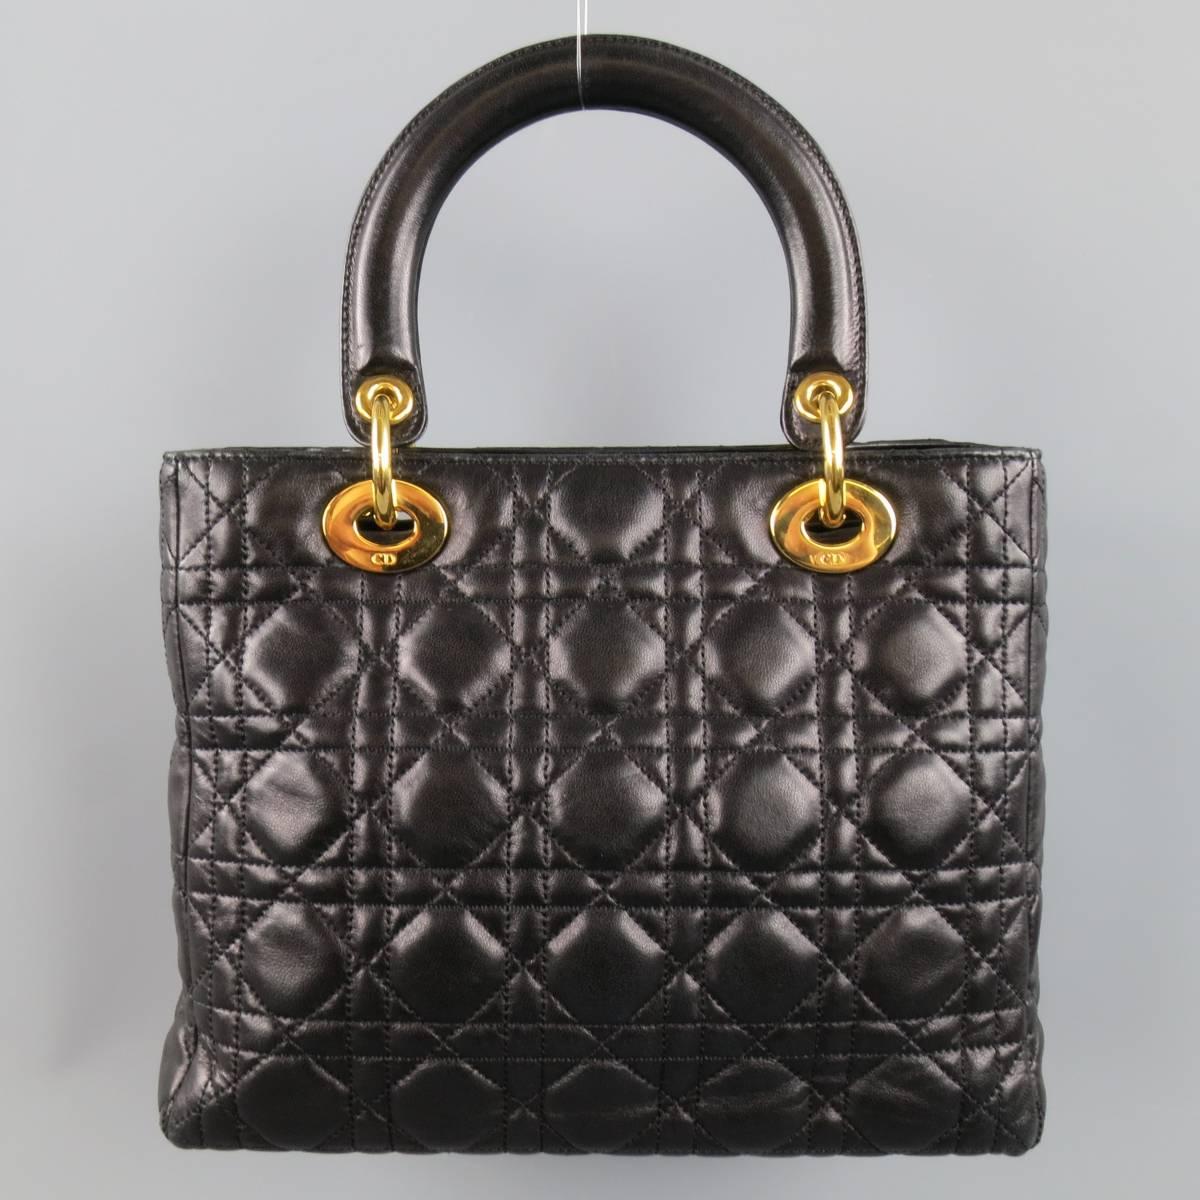 CHRISTIAN DIOR Black & Gold Cannage Quilted Leather Medium Lady Dior Bag 1